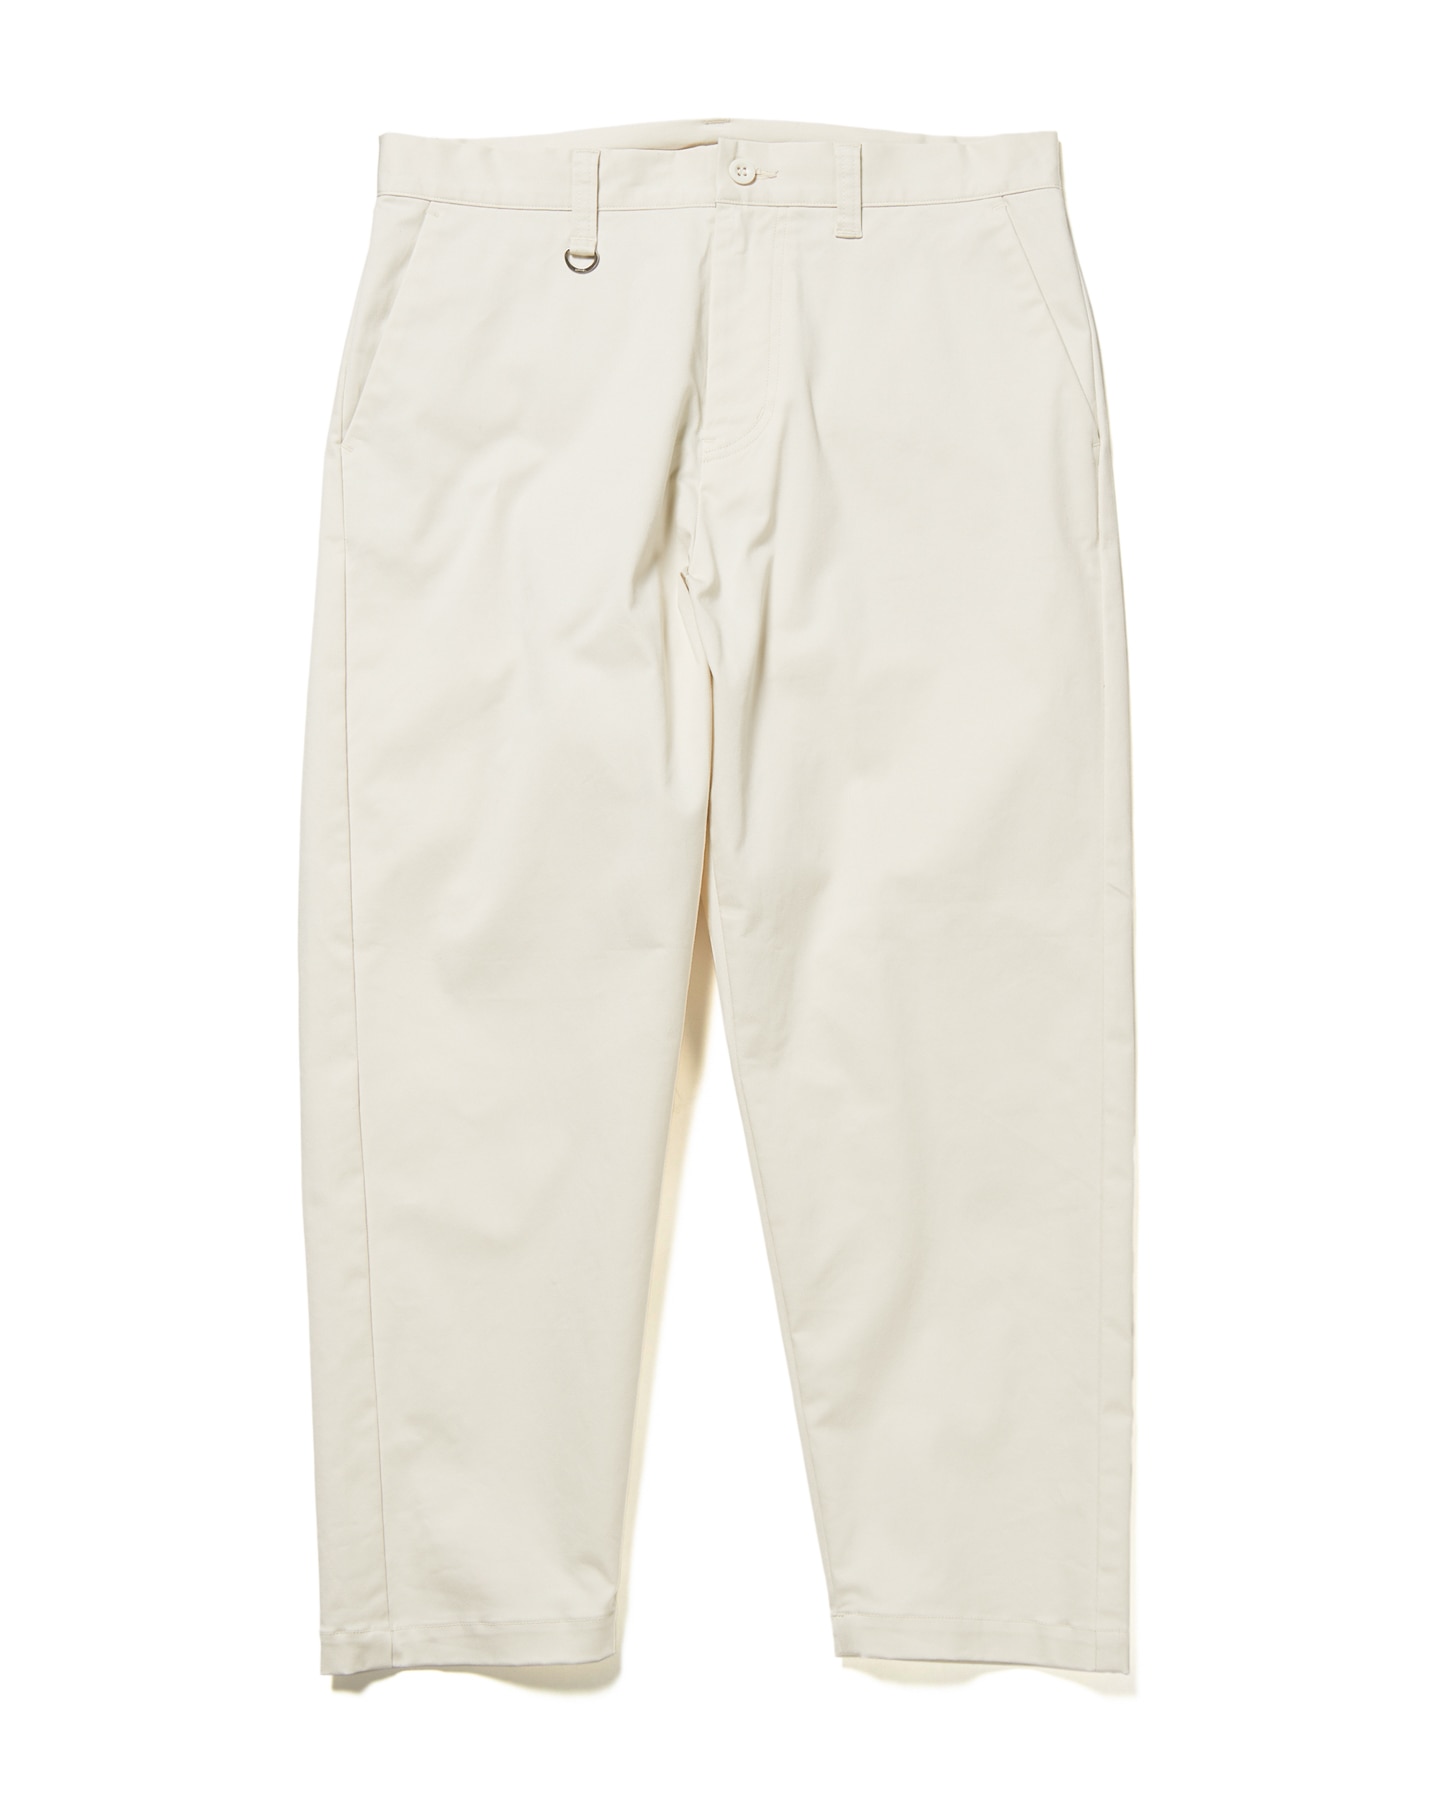 SOPH. | WIDE CROPPED PANTS(M OFF WHITE):